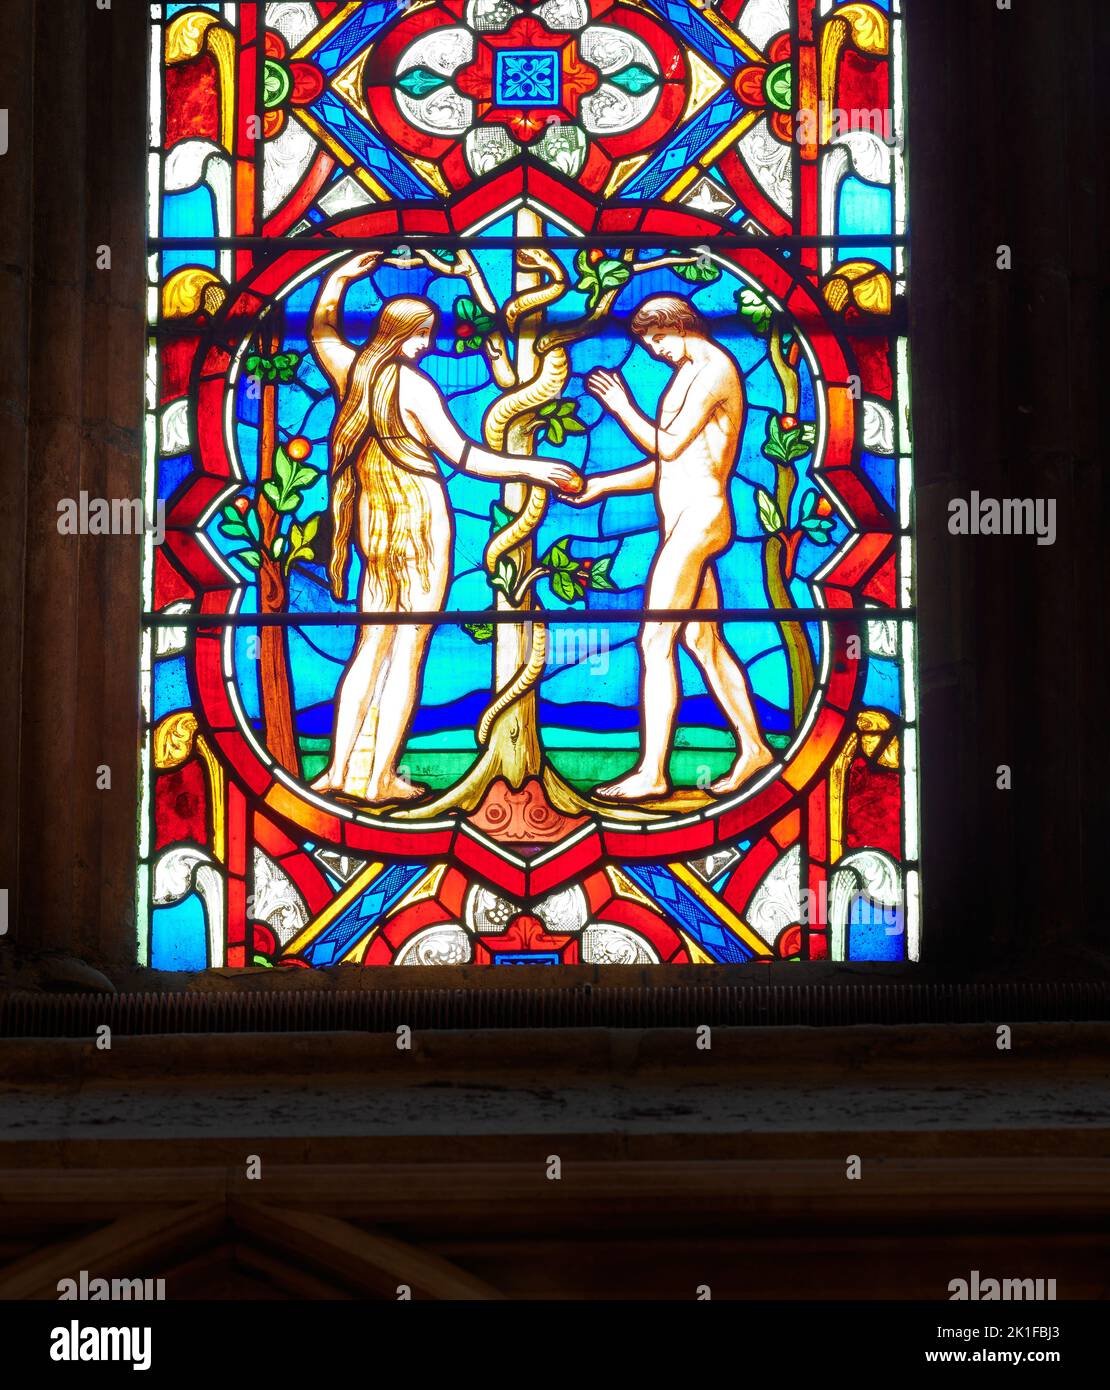 Eve and Adam and the serpent, with an apple in the garden of Eden; a stained glass window at Lincoln cathedral, England. Stock Photo